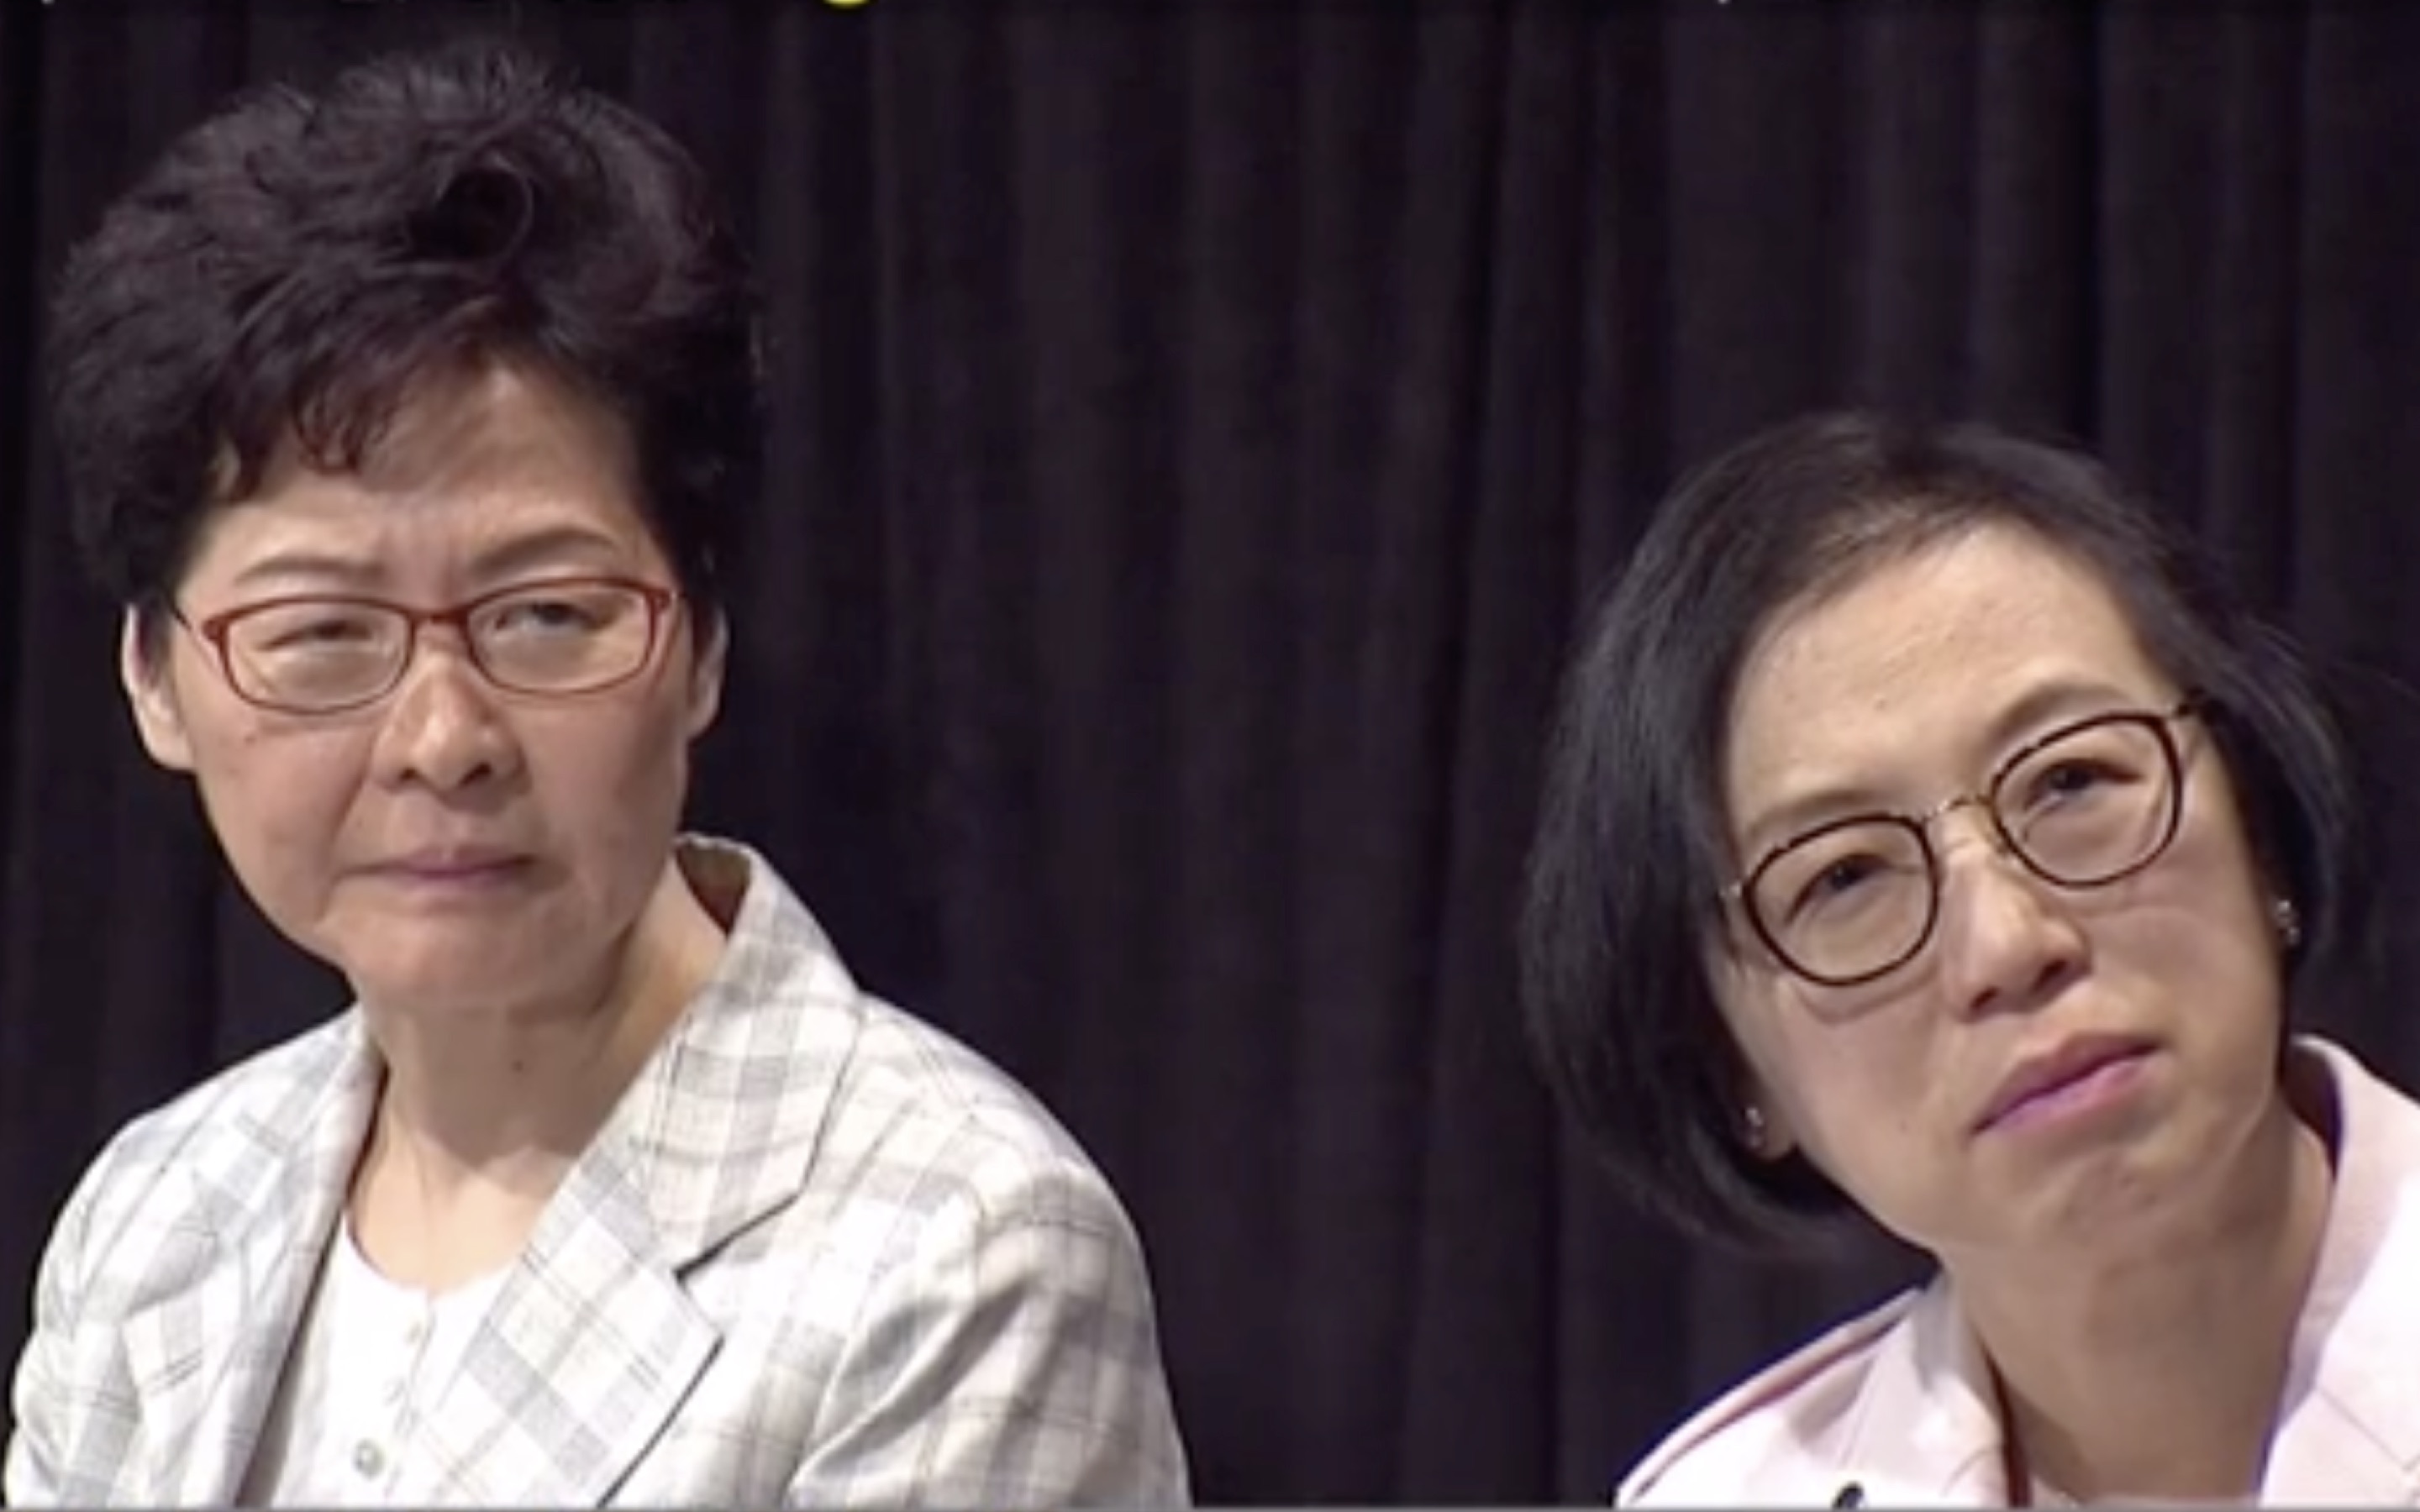 Chief Executive Carrie Lam and Health Secretary Sophia Chan listen to a question from a member of the public at a town hall meeting in Wan Chai on Thursday night. Screengrab via Facebook/Now News.